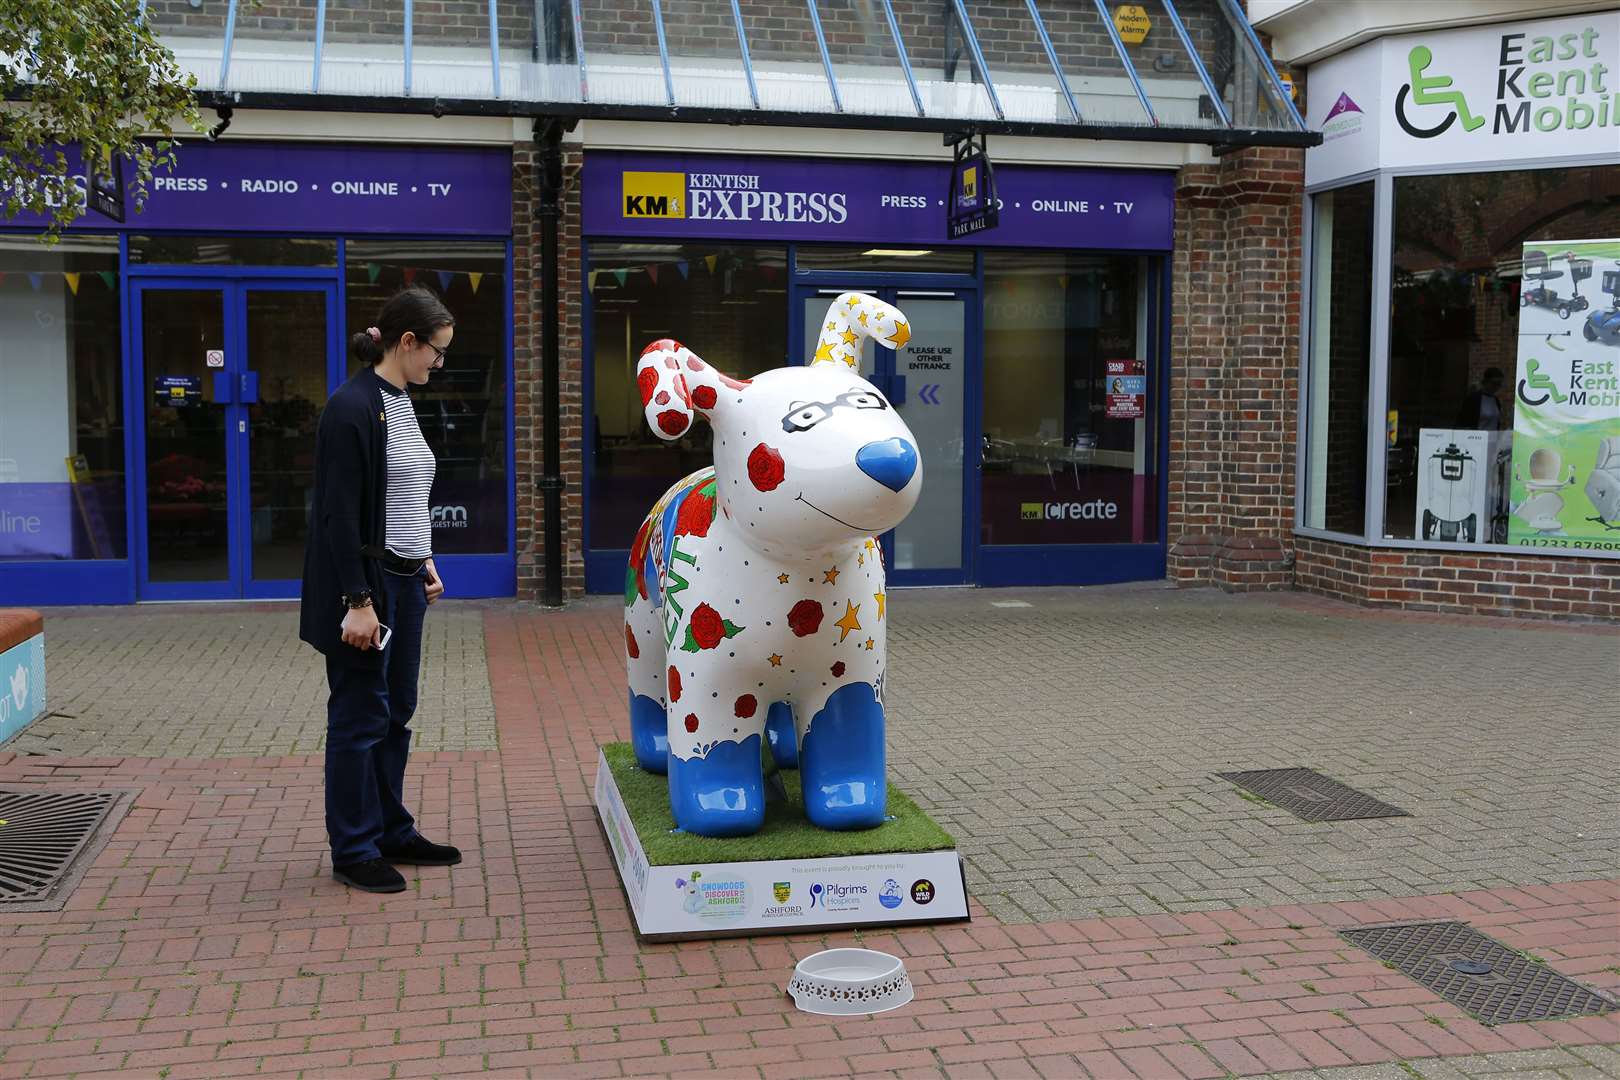 One of her creations, Bark Kent, was stationed outside the Kentish Express office for two months